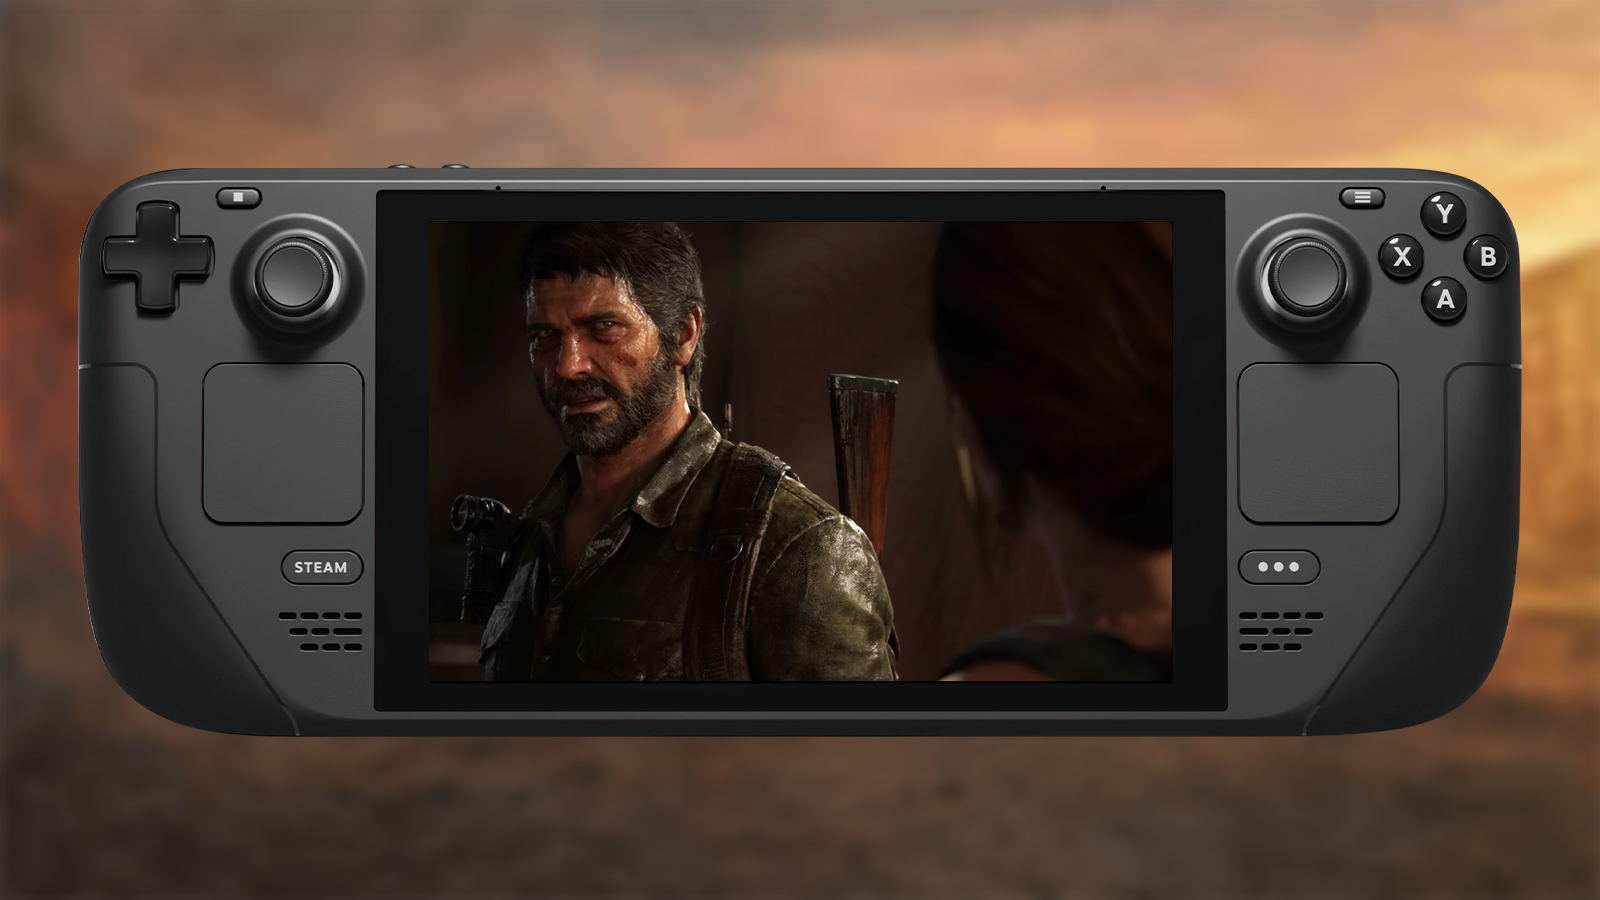 The Last of Us Part I, former Steam Deck reject, gets Steam Deck Verified